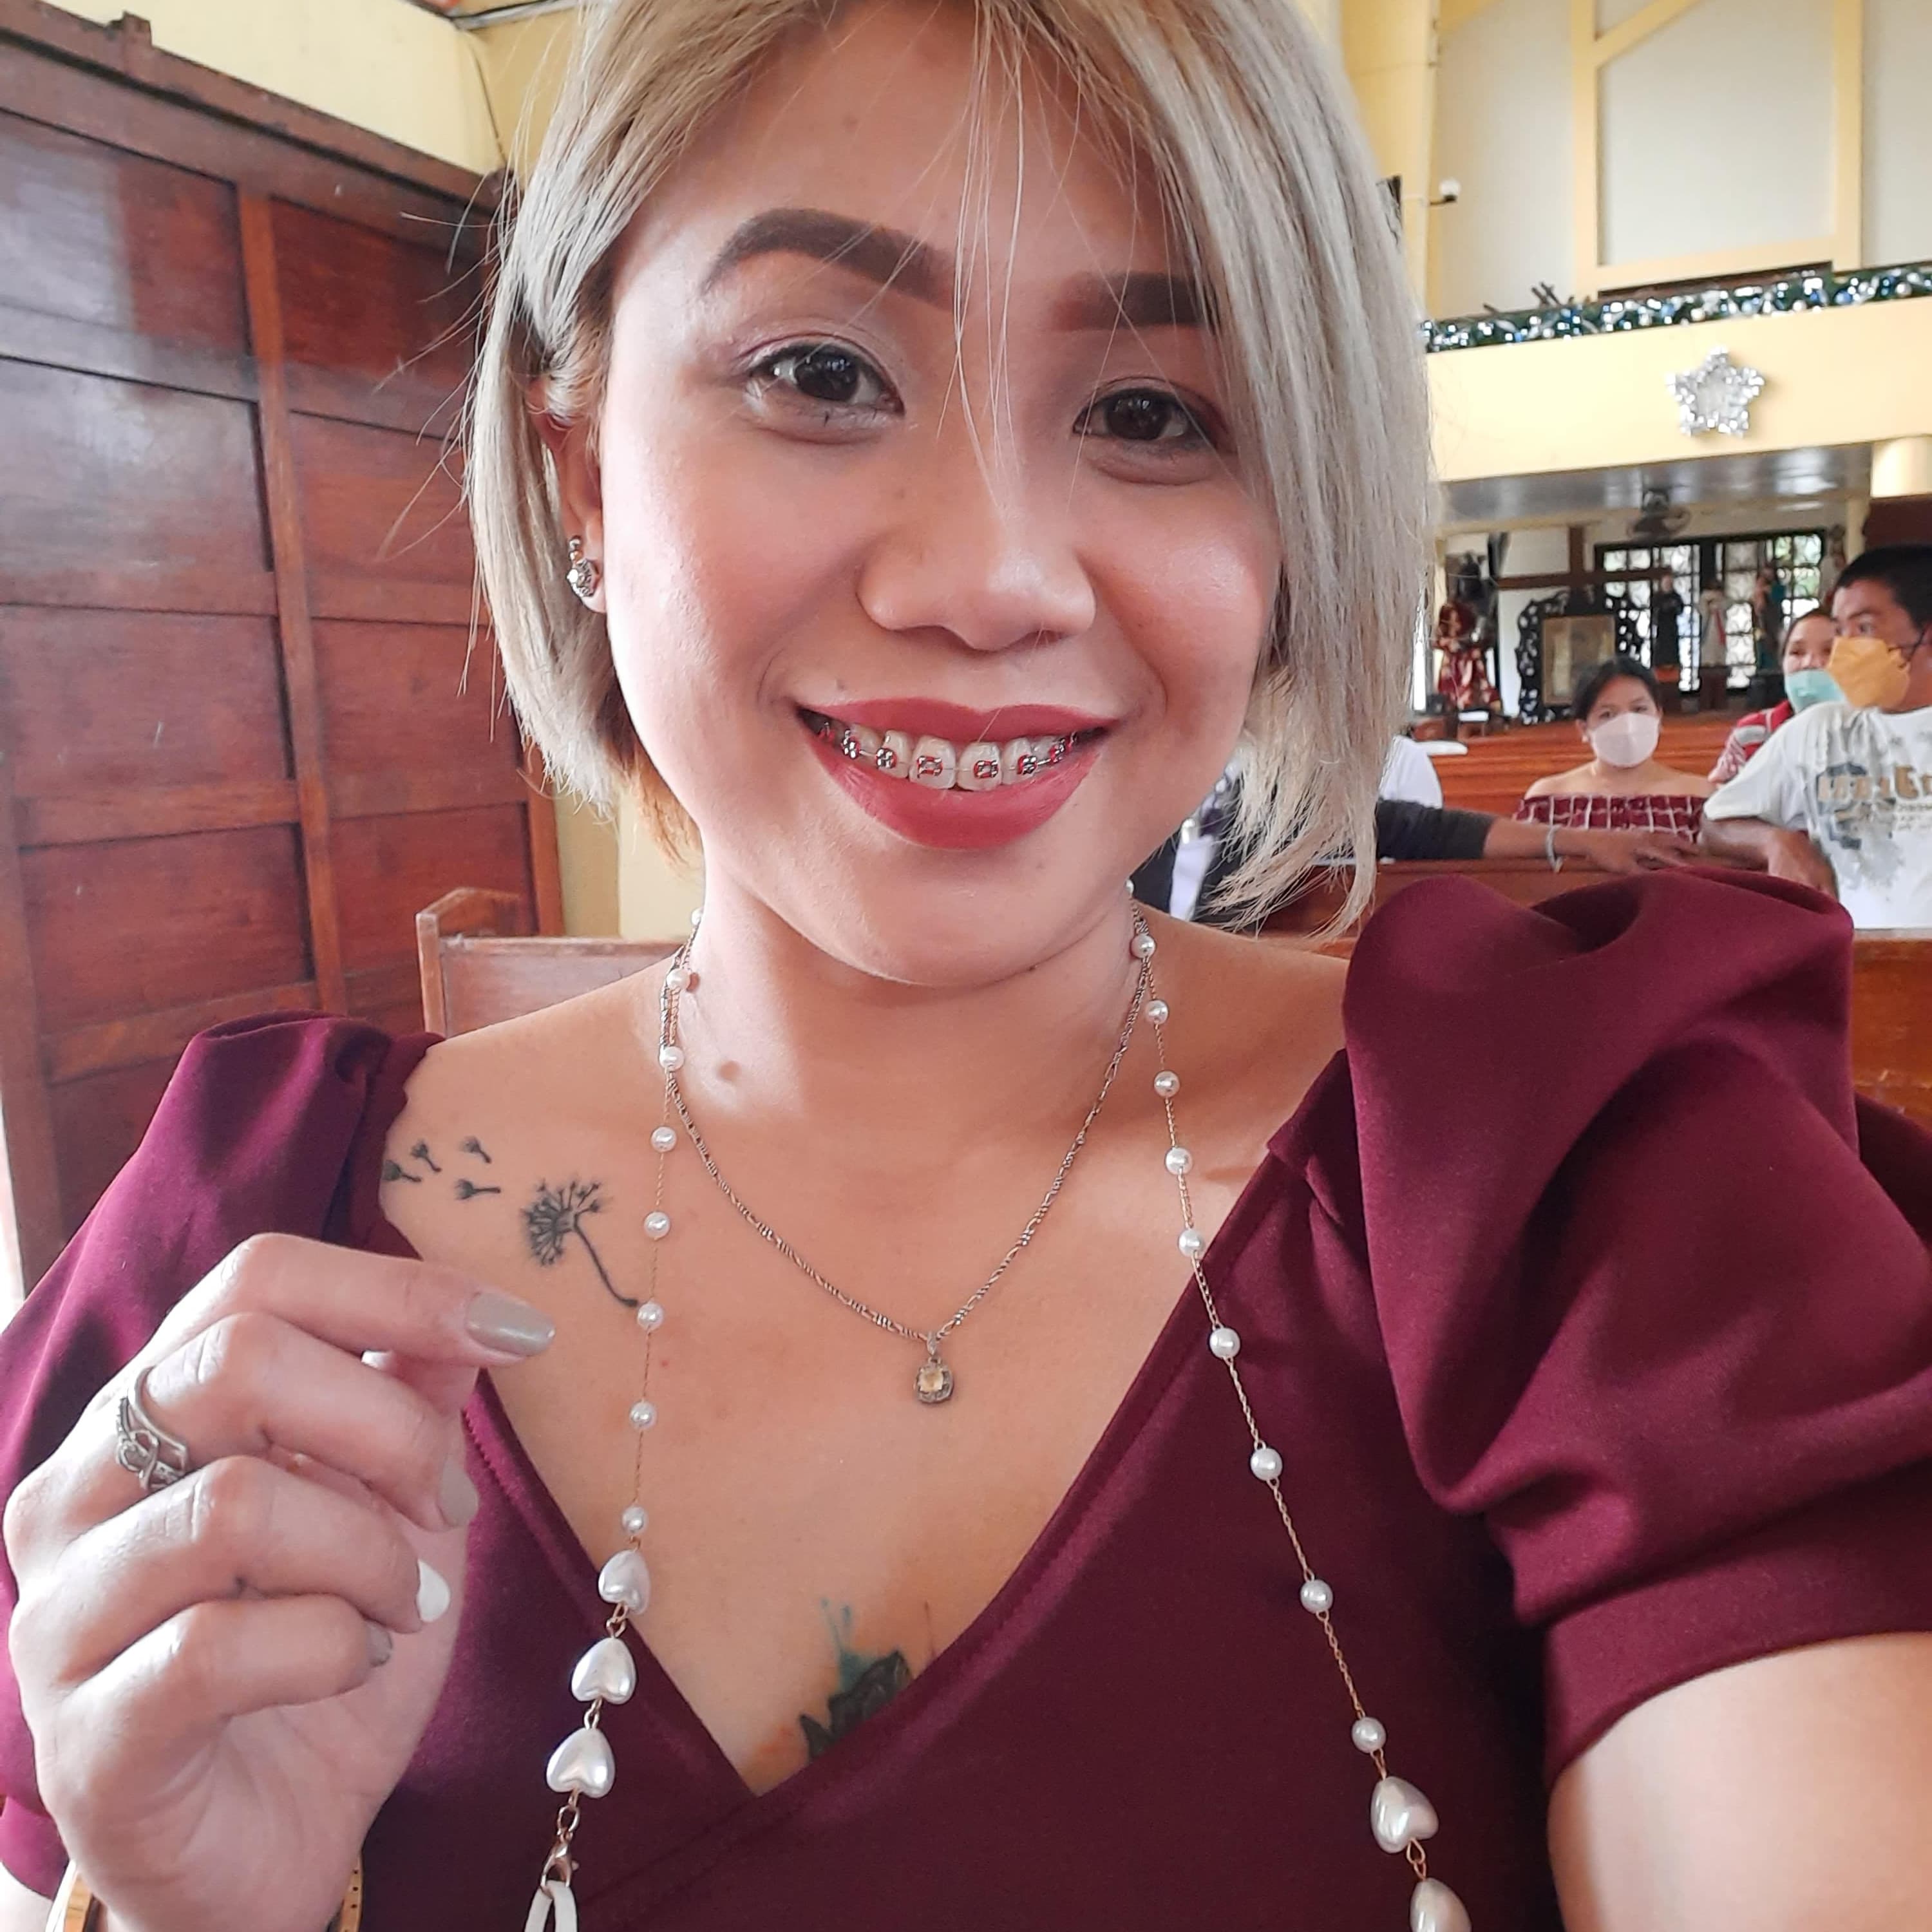 I'm from Philippines looking for a good family. I'm been a single mother for 14 years.